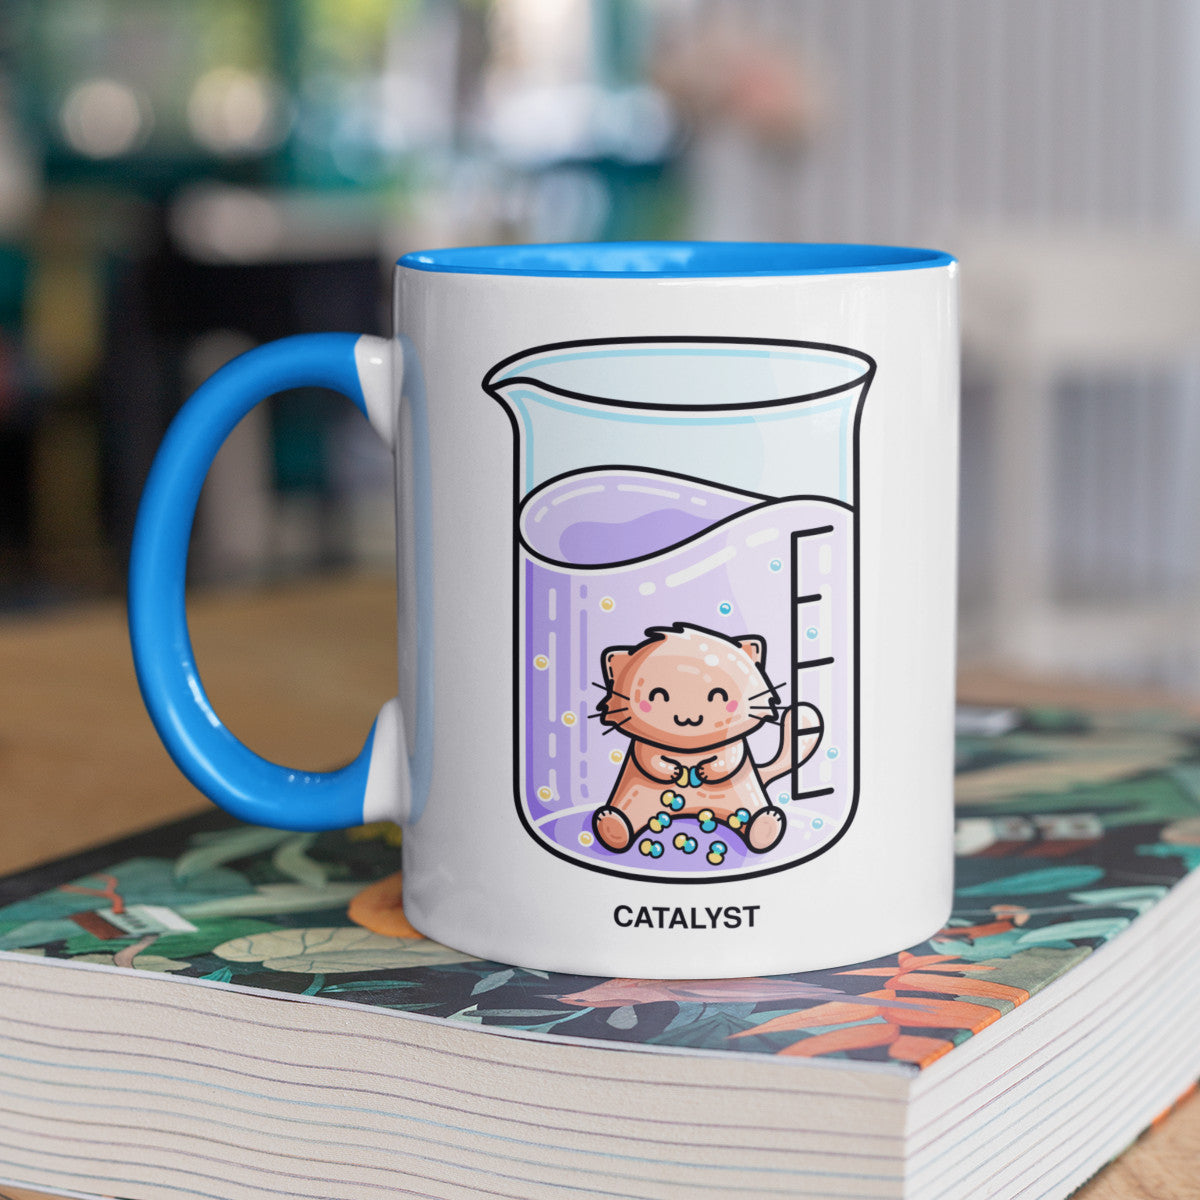 Cute cat joining atoms in a chemistry beaker of liquid design on a two toned blue and white ceramic mug, showing LHS